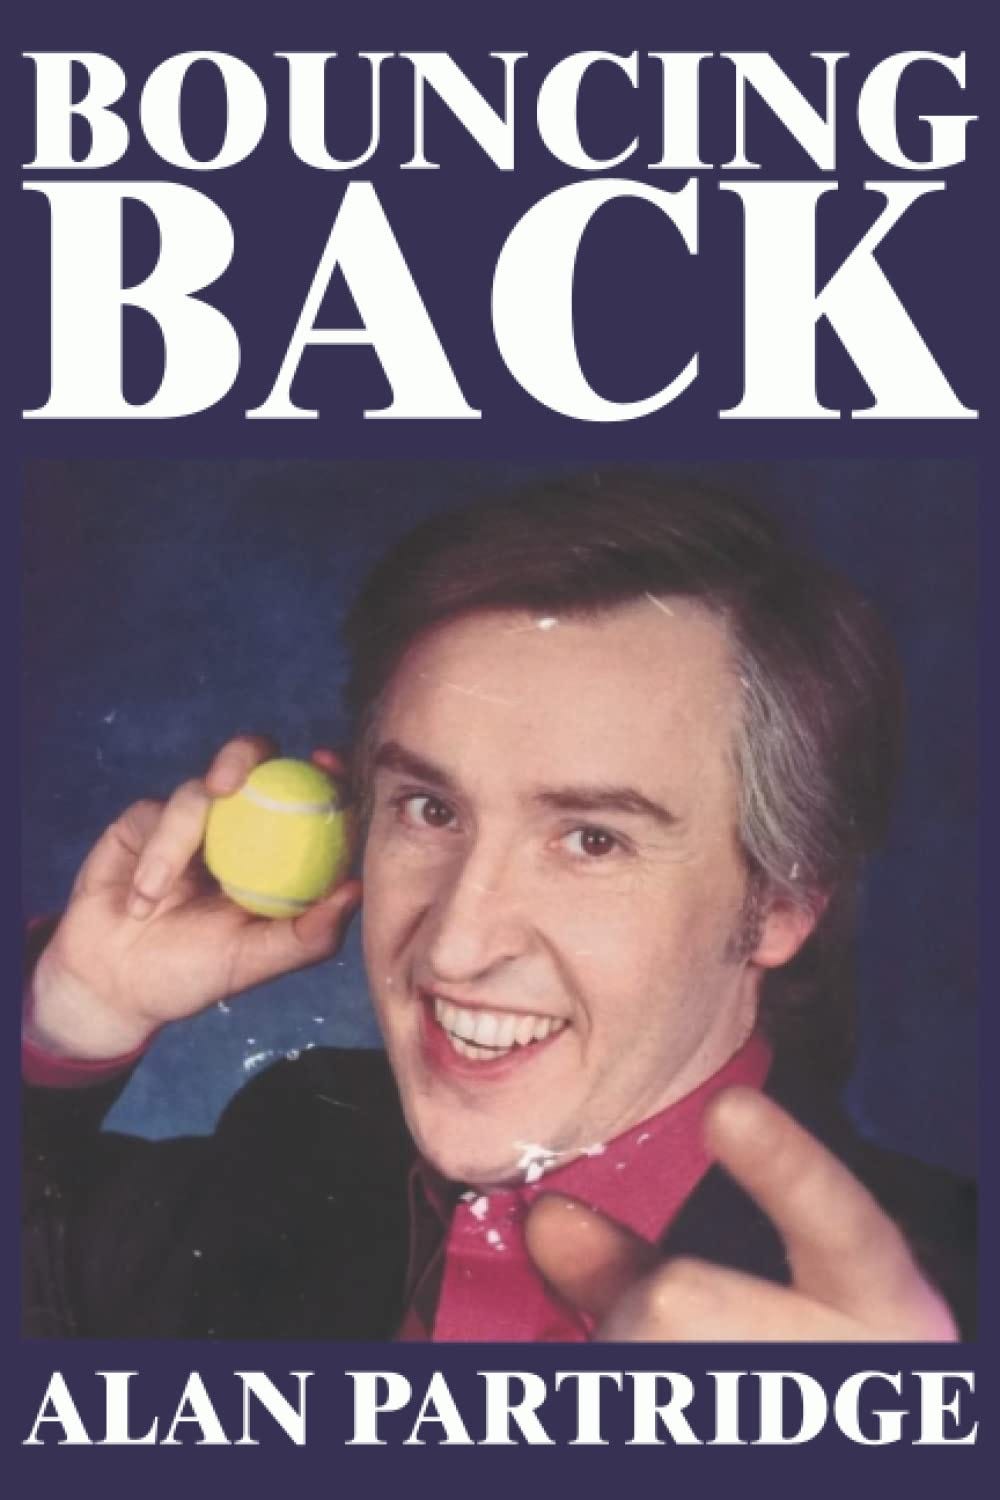 Front cover of Alan Partridge's book "Bouncing Back" from the TV show I'm Alan Partridge